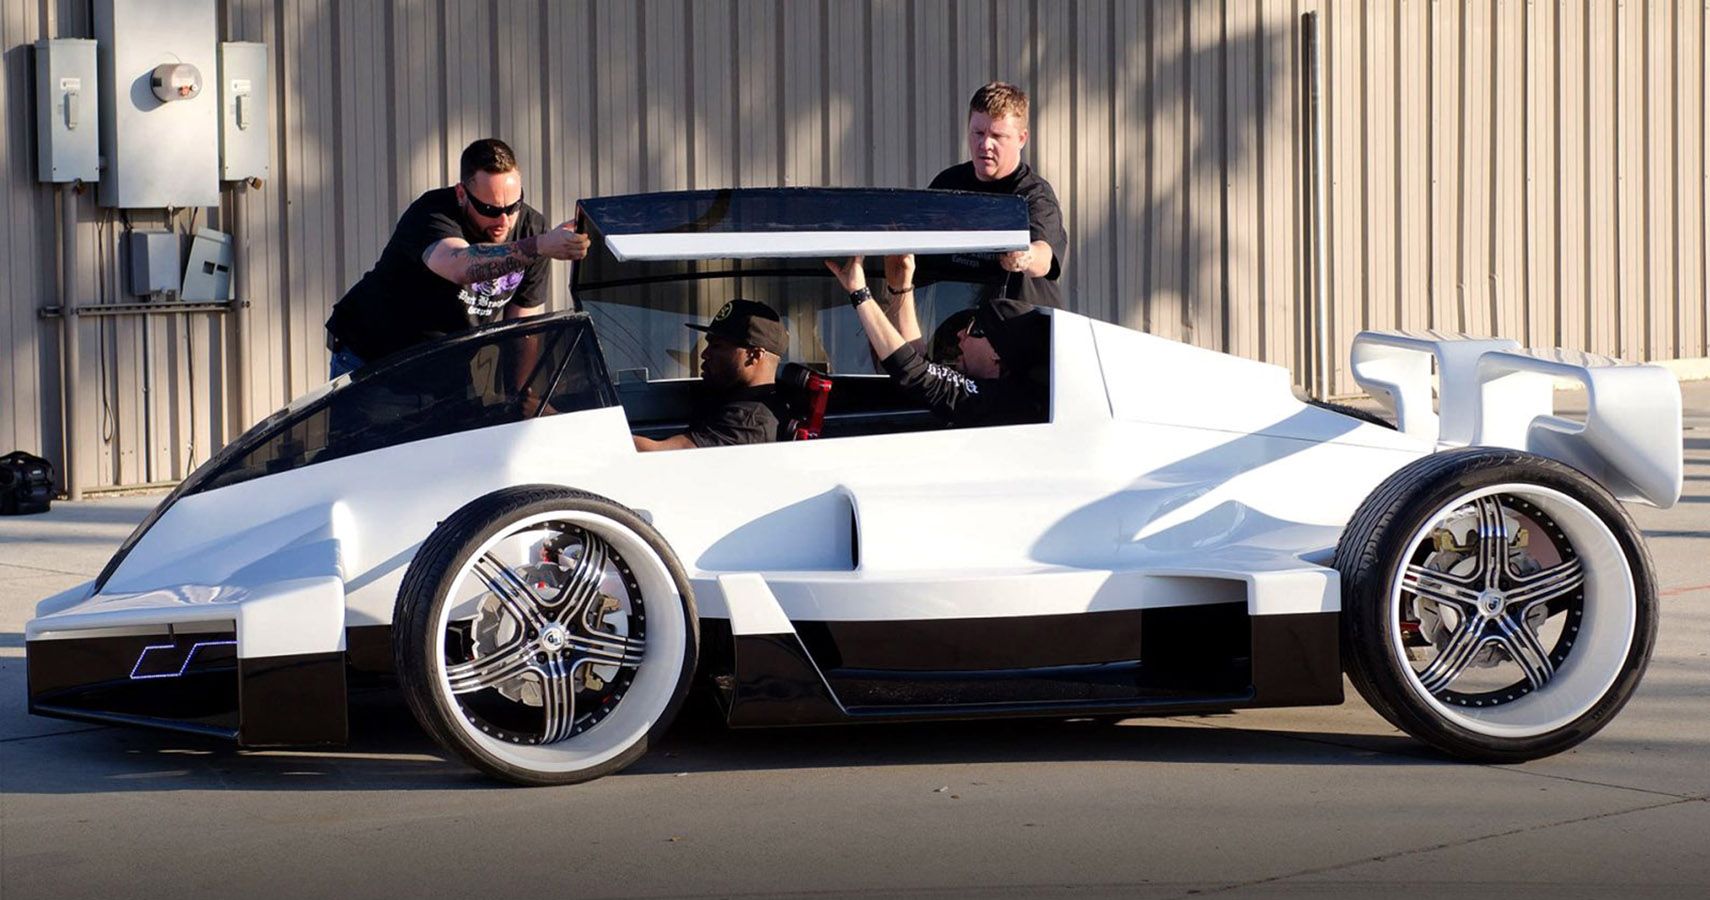 How 50 Cent Made An Expensive Mistake Buying A $1.5 Million Jet Car